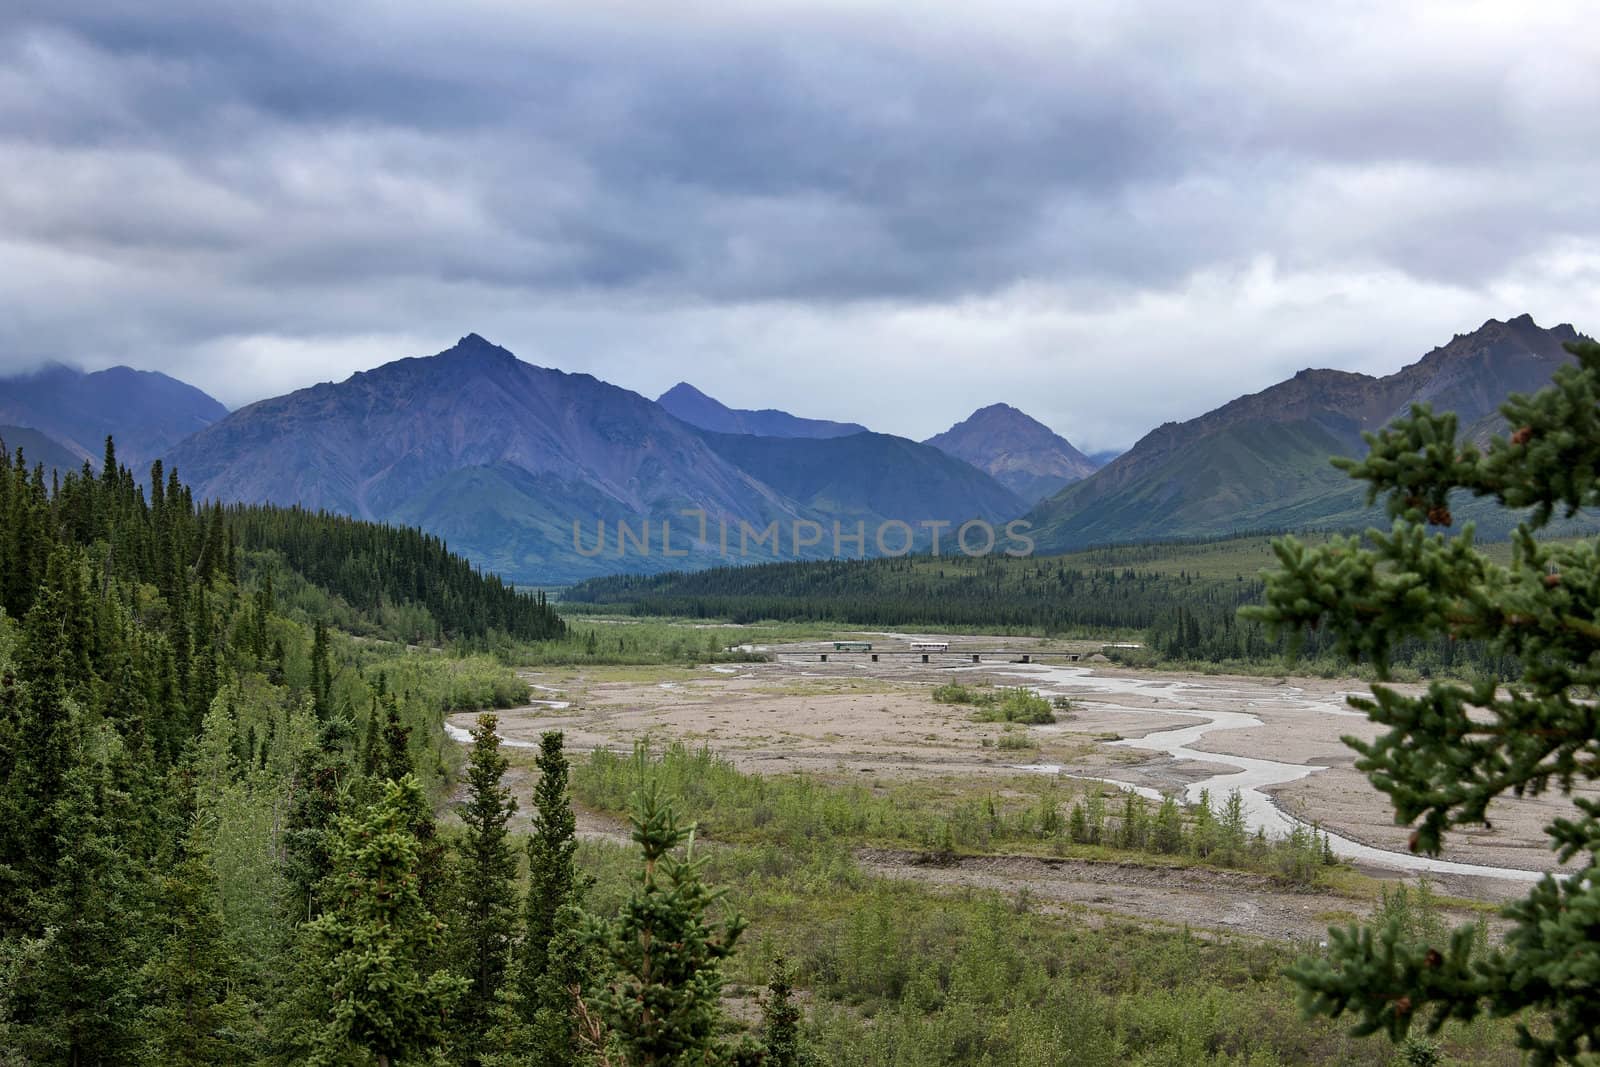 Spectacular wide view over valley with narrow meandering river and mountains in the background.